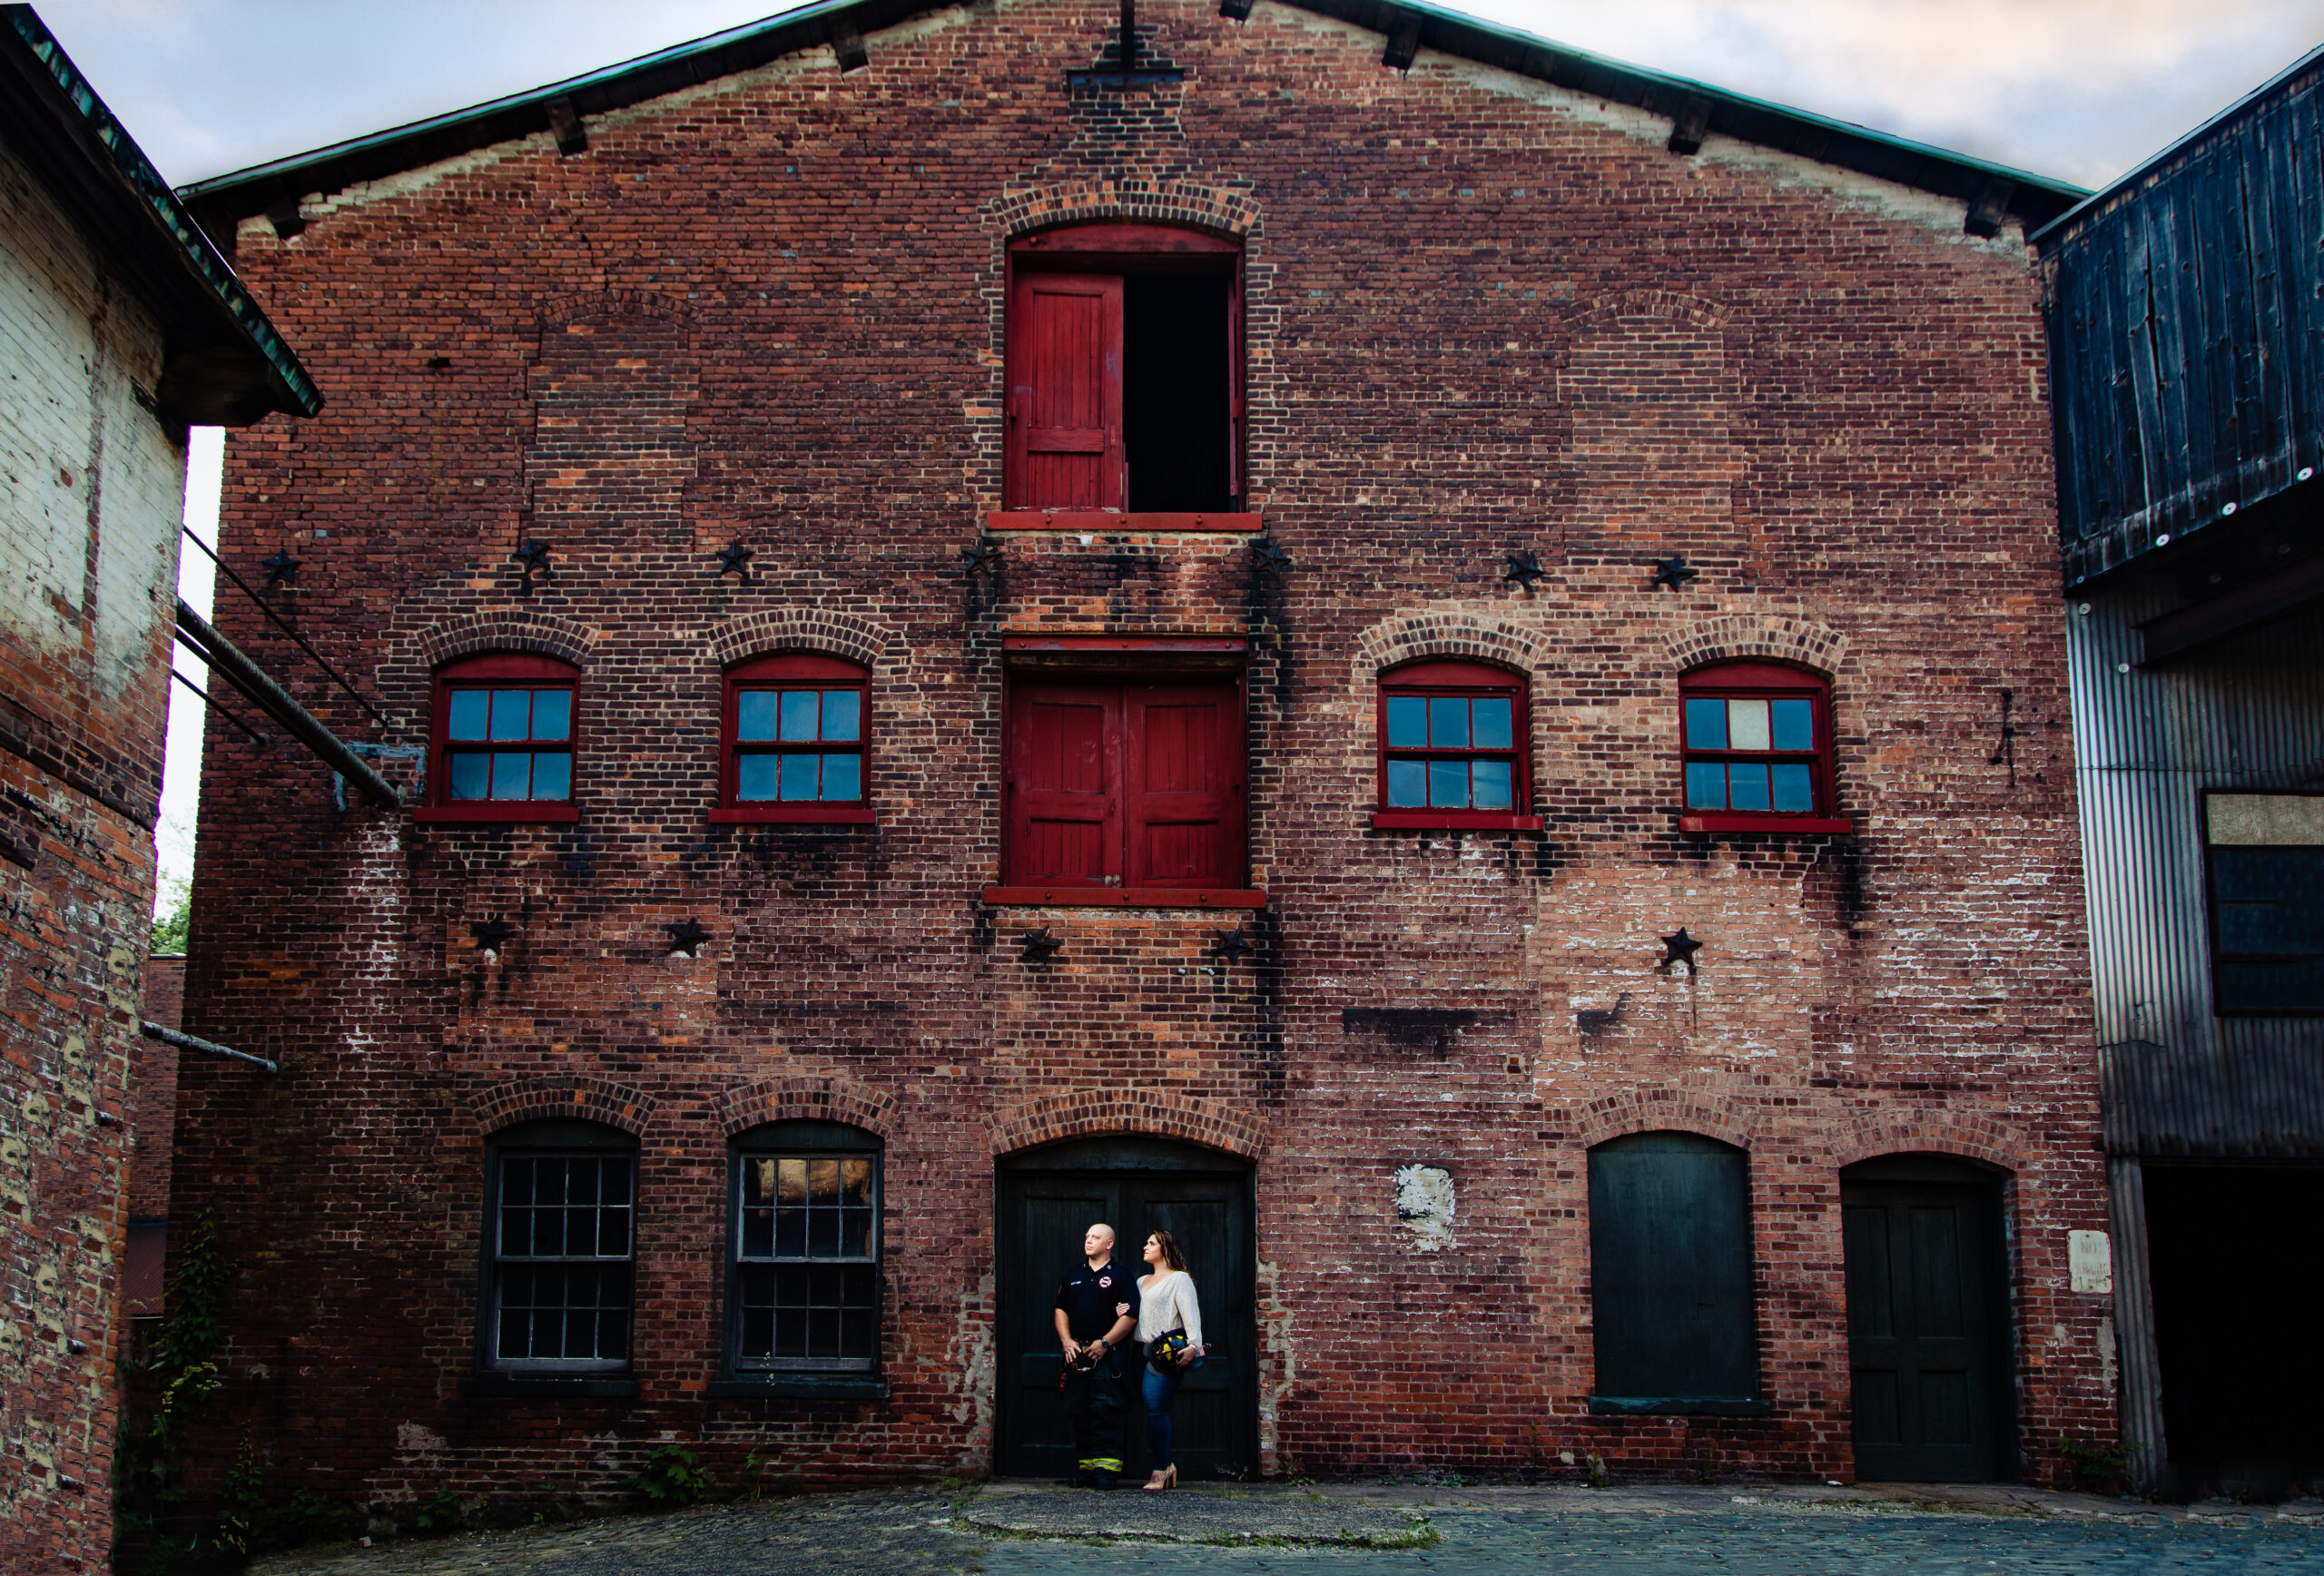 A couple captured by New Jersey Wedding Photographer Jarot Bocanegra, standing in front of a brick building.